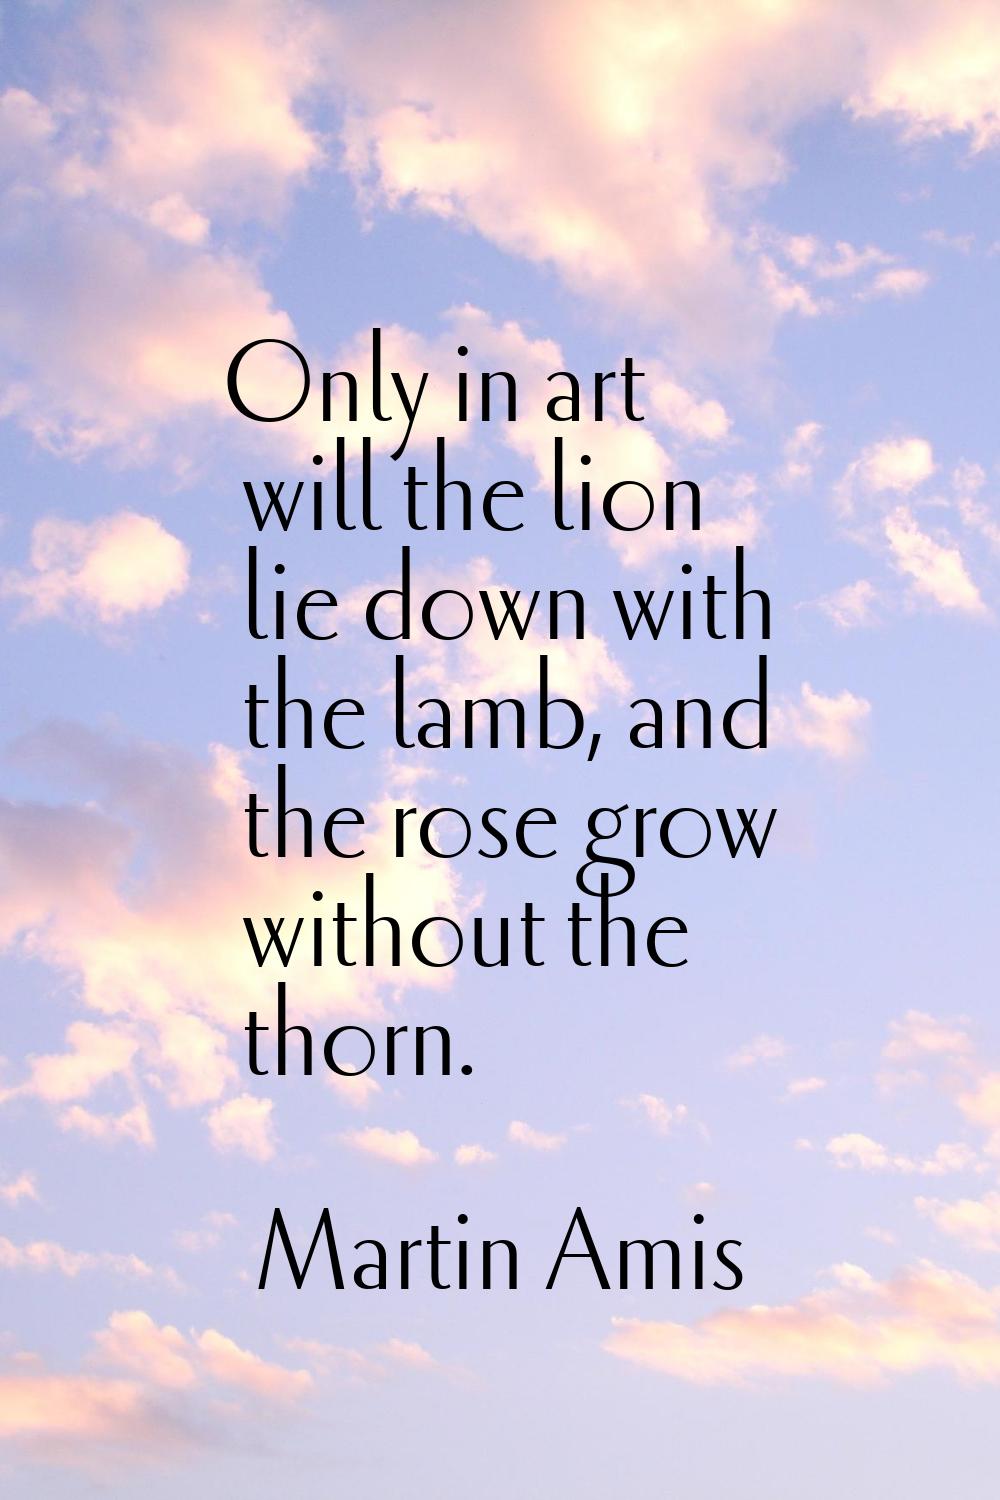 Only in art will the lion lie down with the lamb, and the rose grow without the thorn.